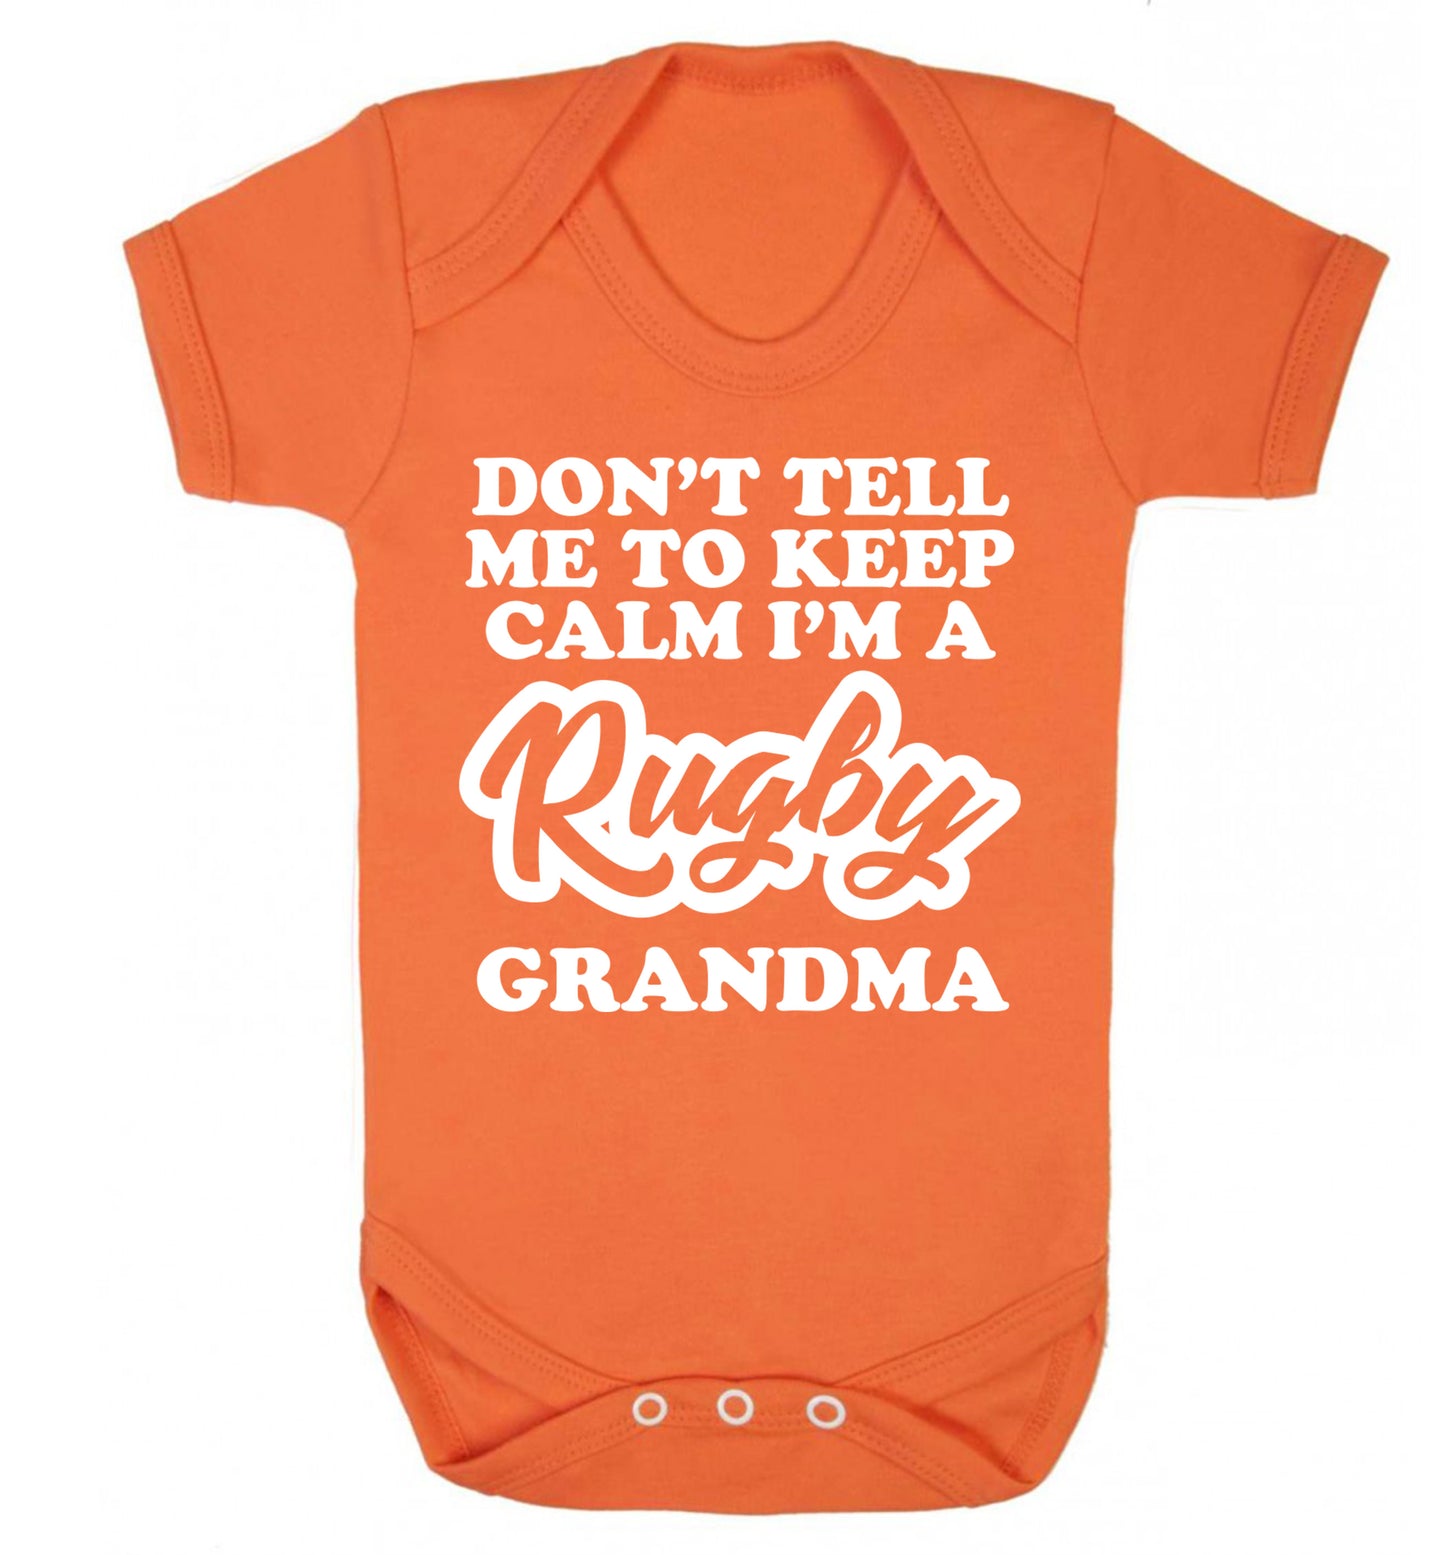 Don't tell me to keep calm I'm a rugby grandma Baby Vest orange 18-24 months